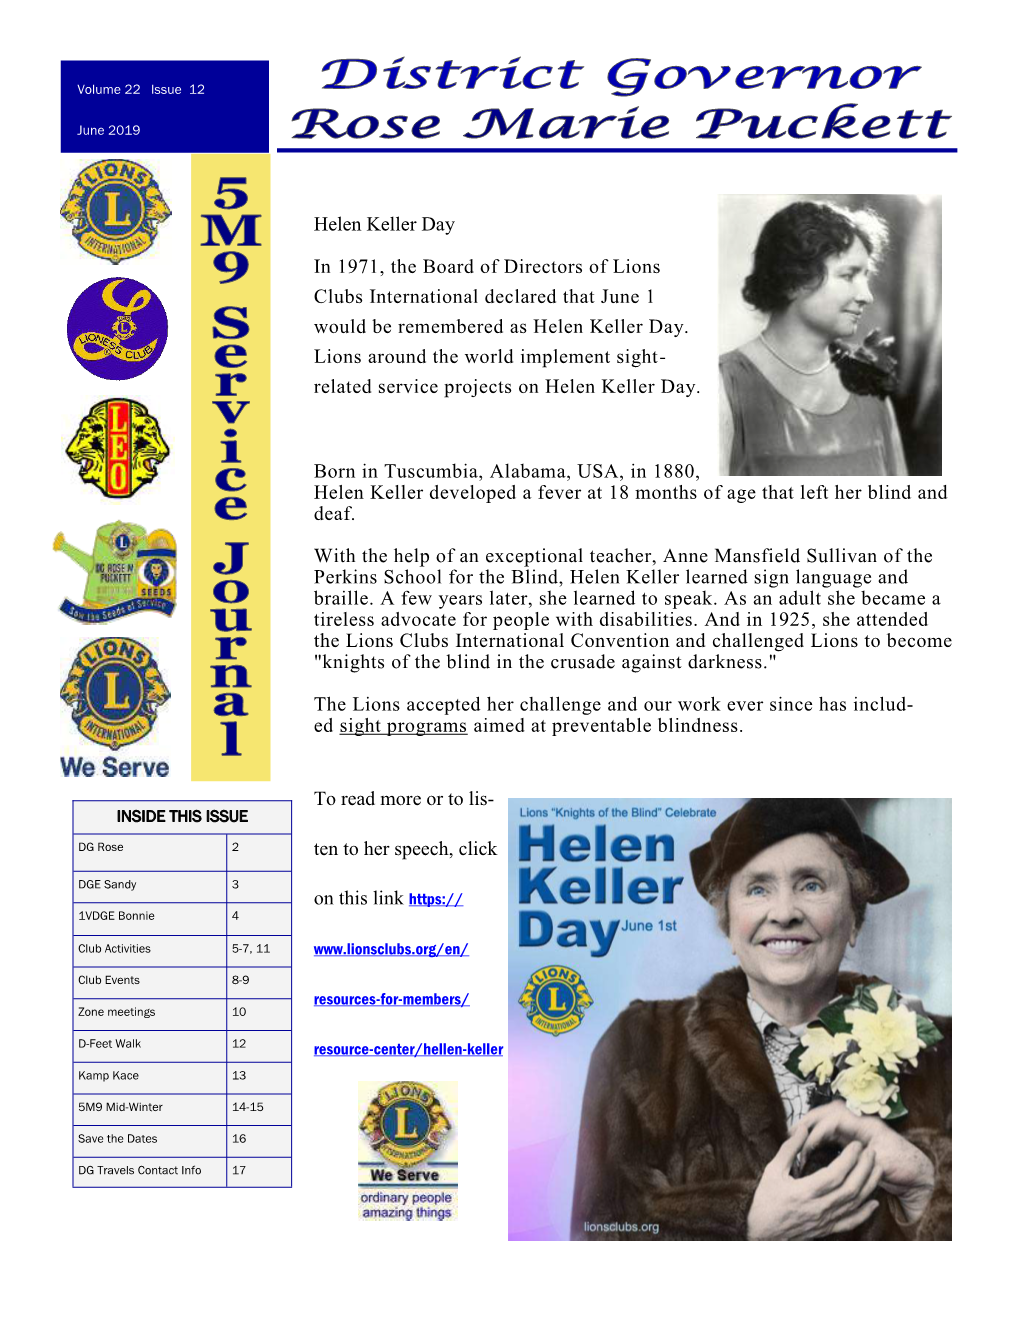 Helen Keller Day in 1971, the Board of Directors of Lions Clubs